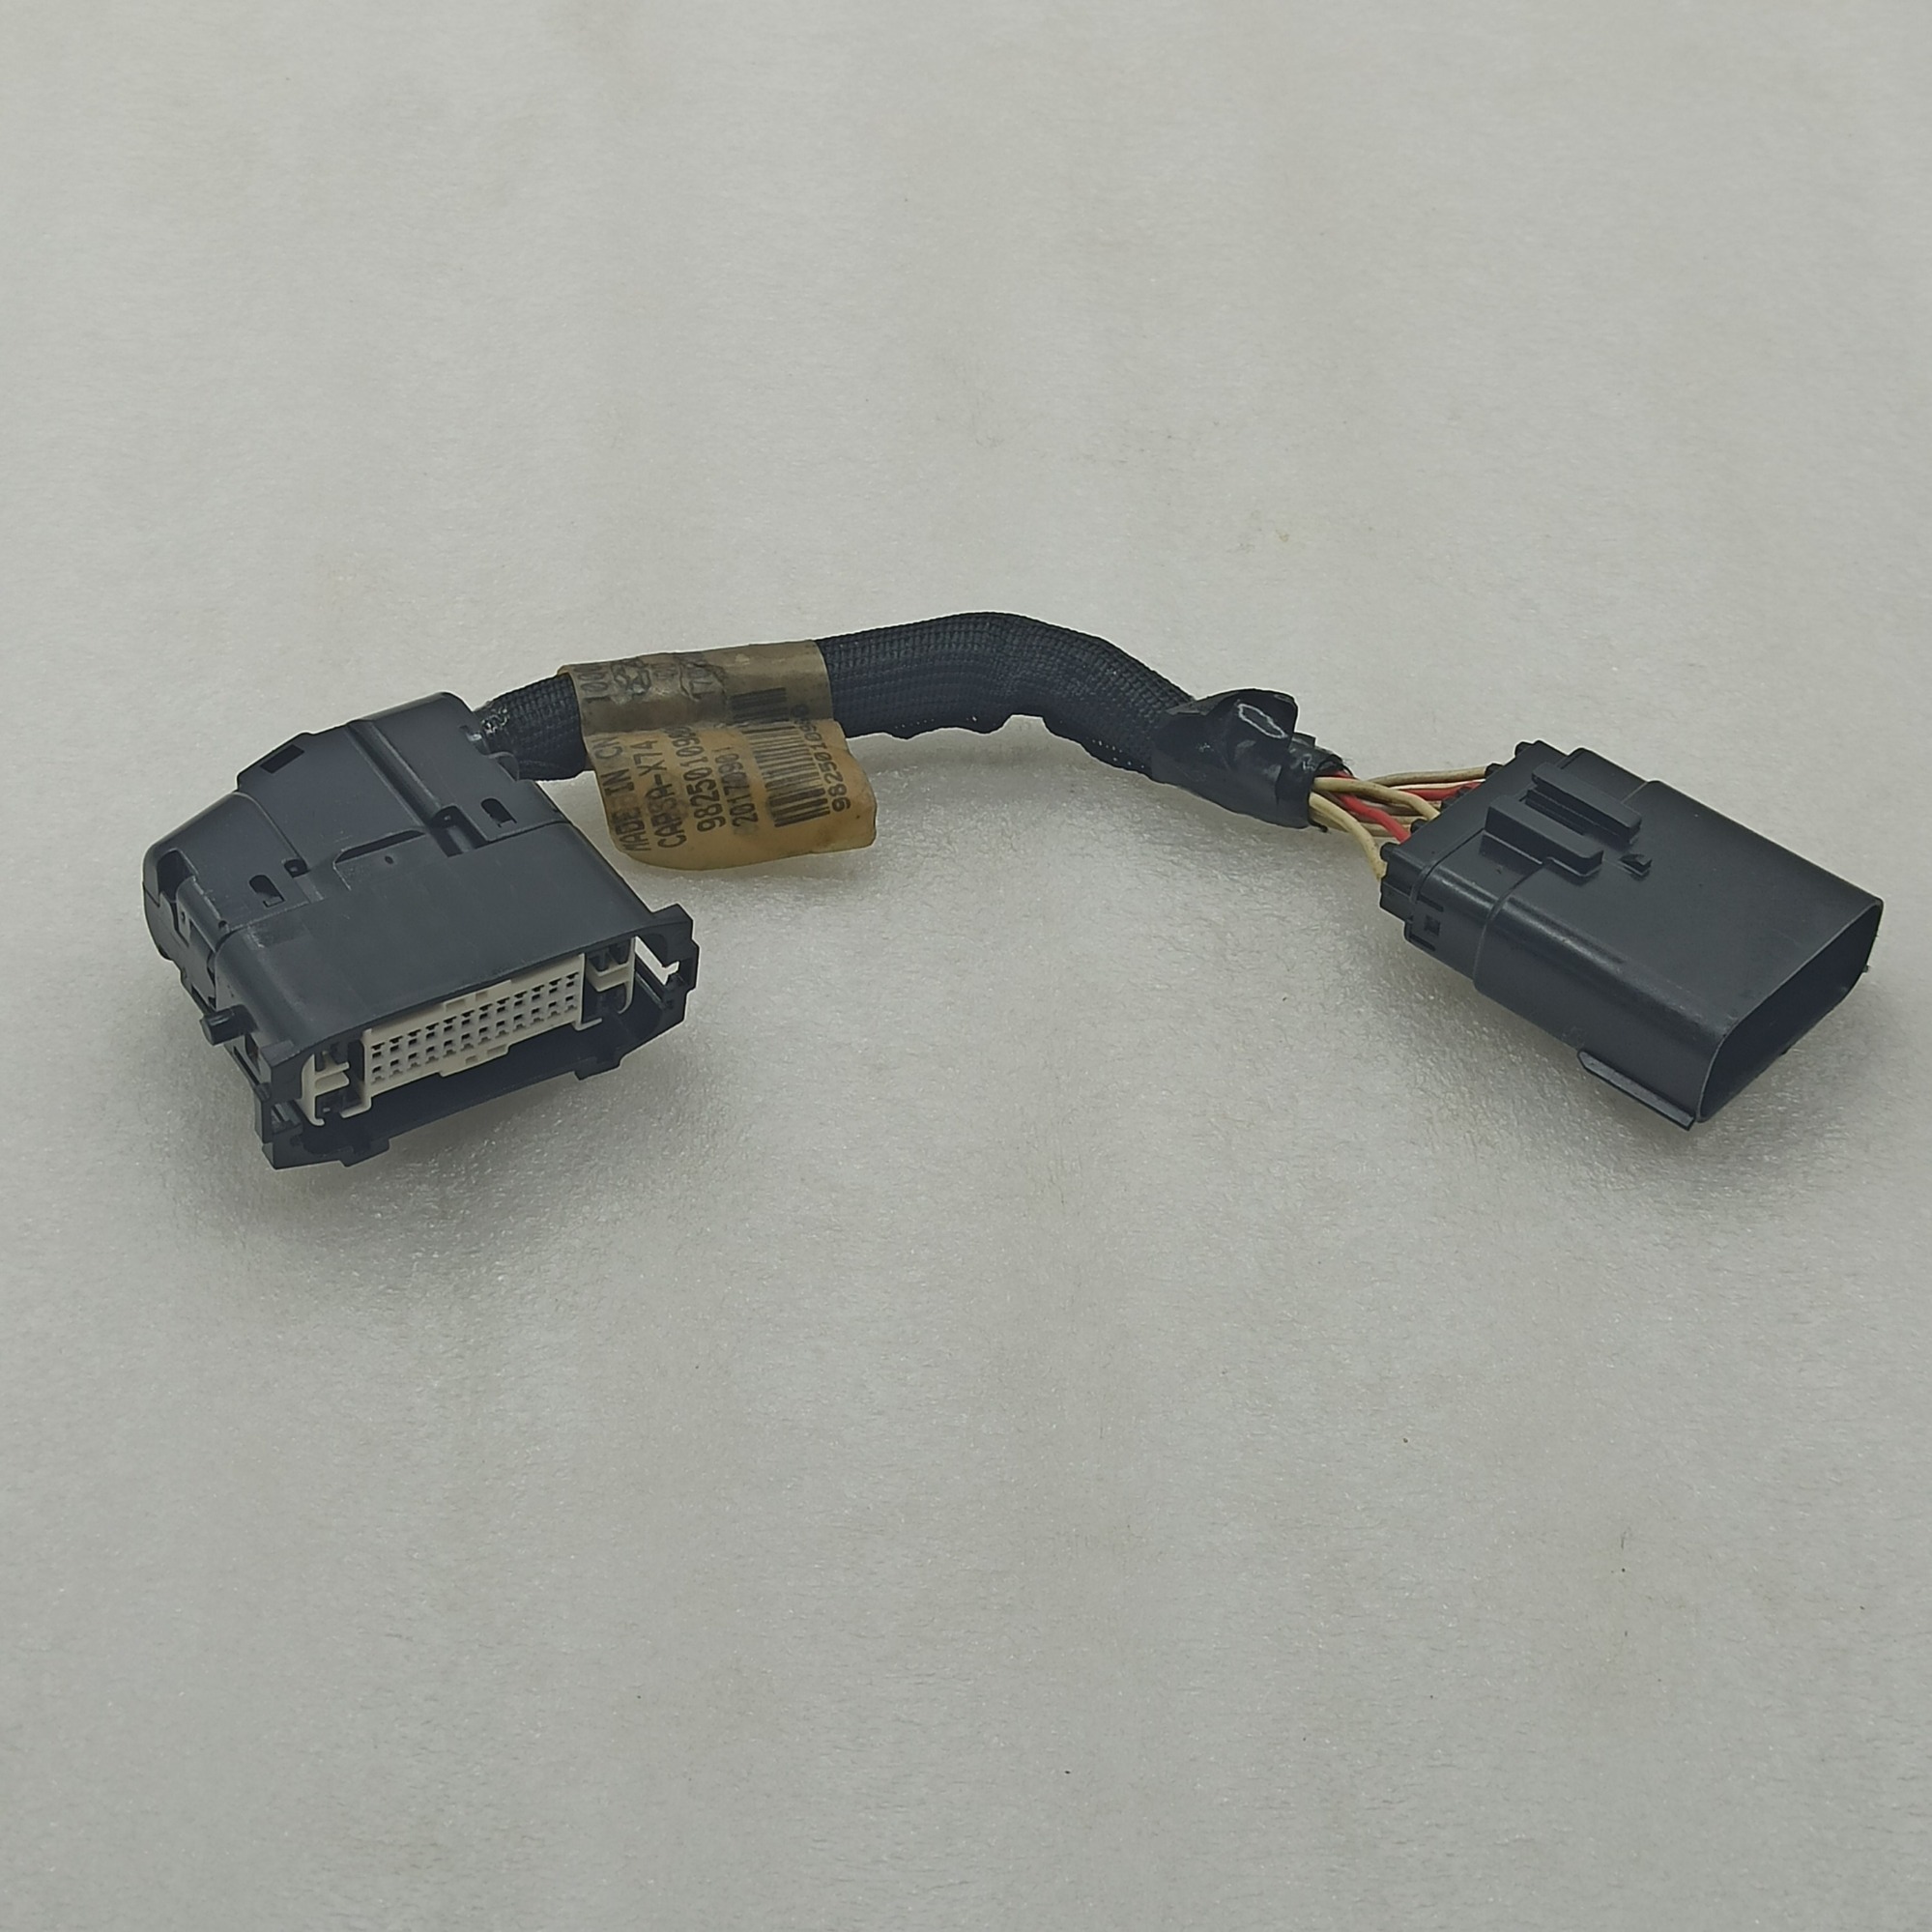 8G30-0008-U1 AWF8G30 outer connector U1 apply to P eugeot C itroen